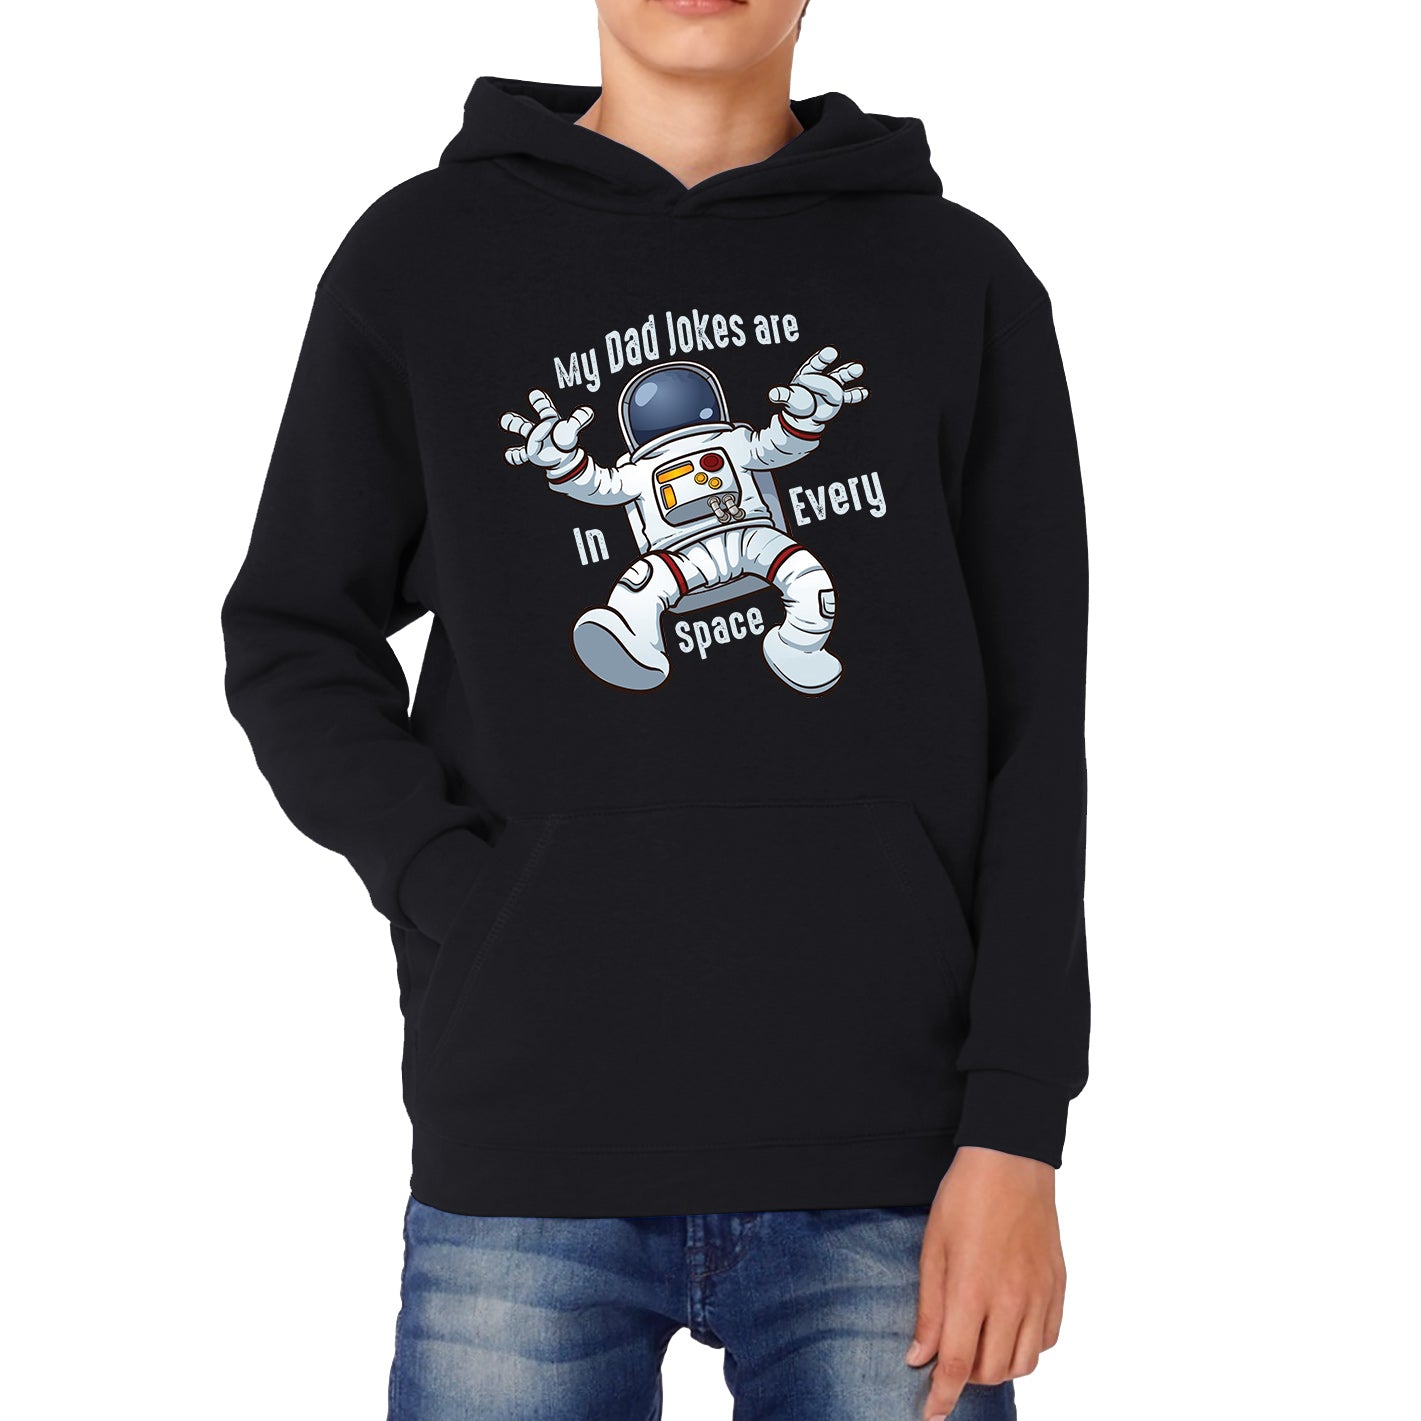 My Dad Jokes Are In Every Space - Falling Astronaut Funny Sarcastic Joke Meme Gift For Father Scientific Meme Joke Space Kids Hoodie